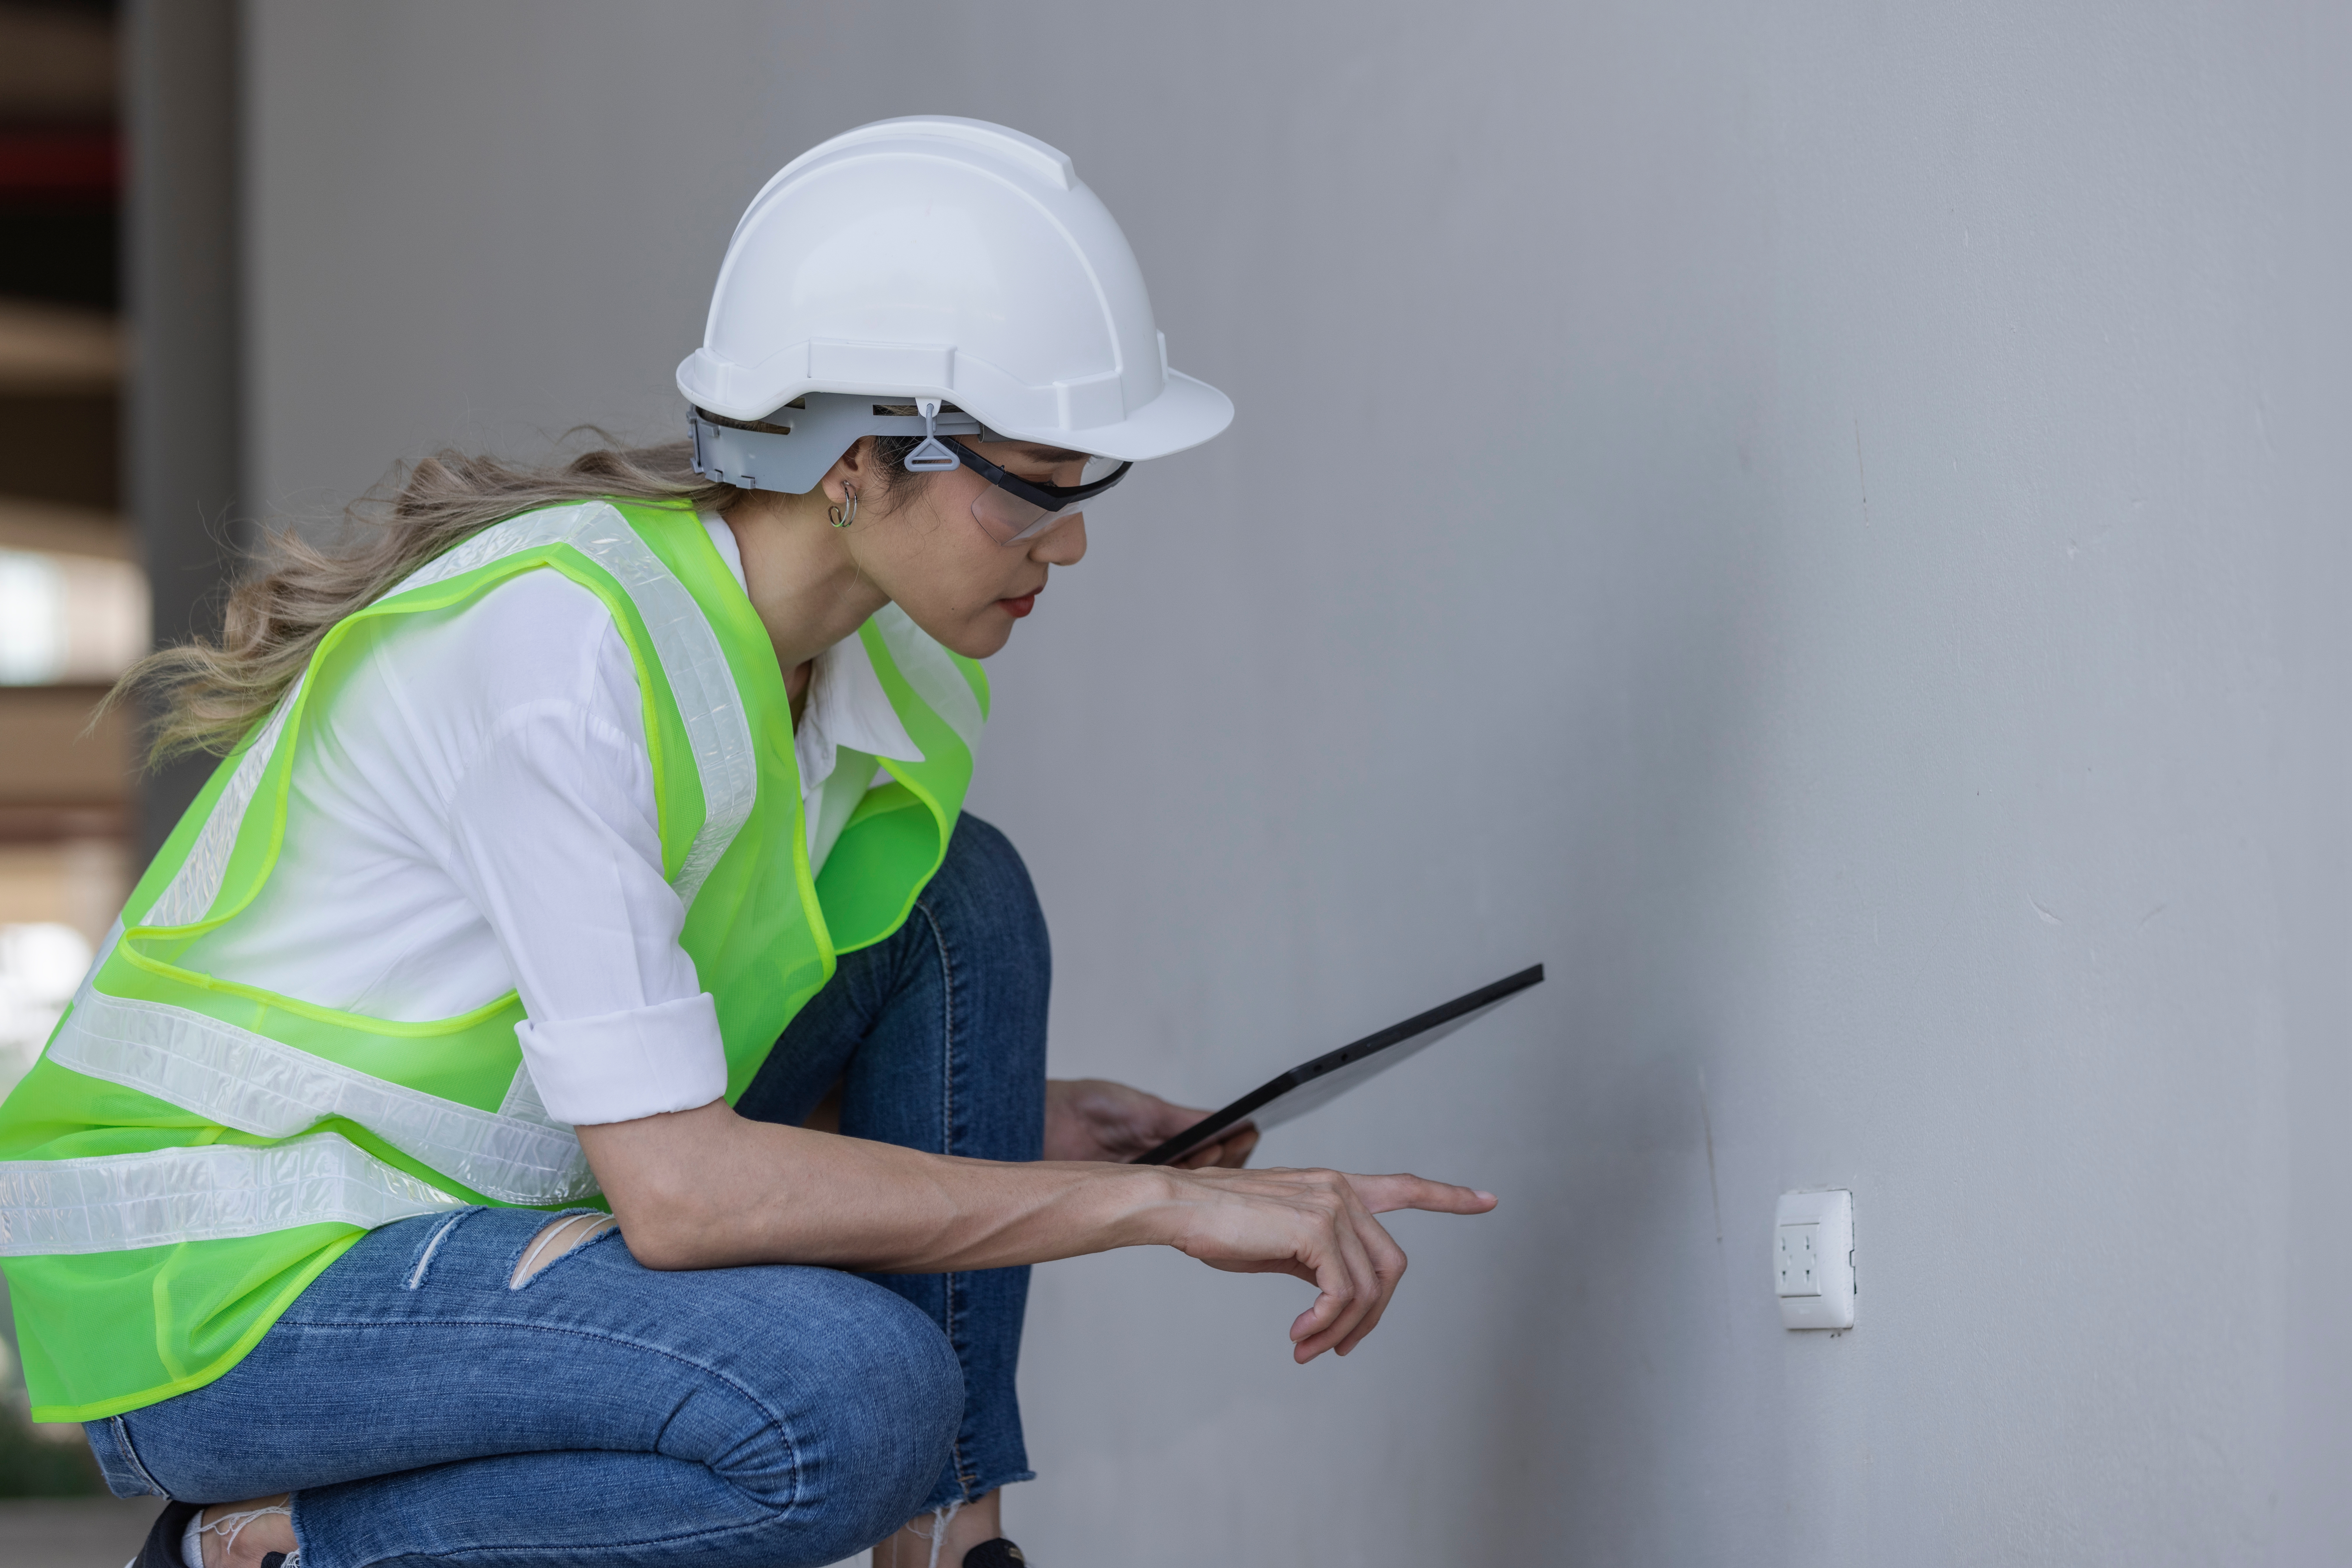 8 Signs You Should Schedule an Electrical Inspection